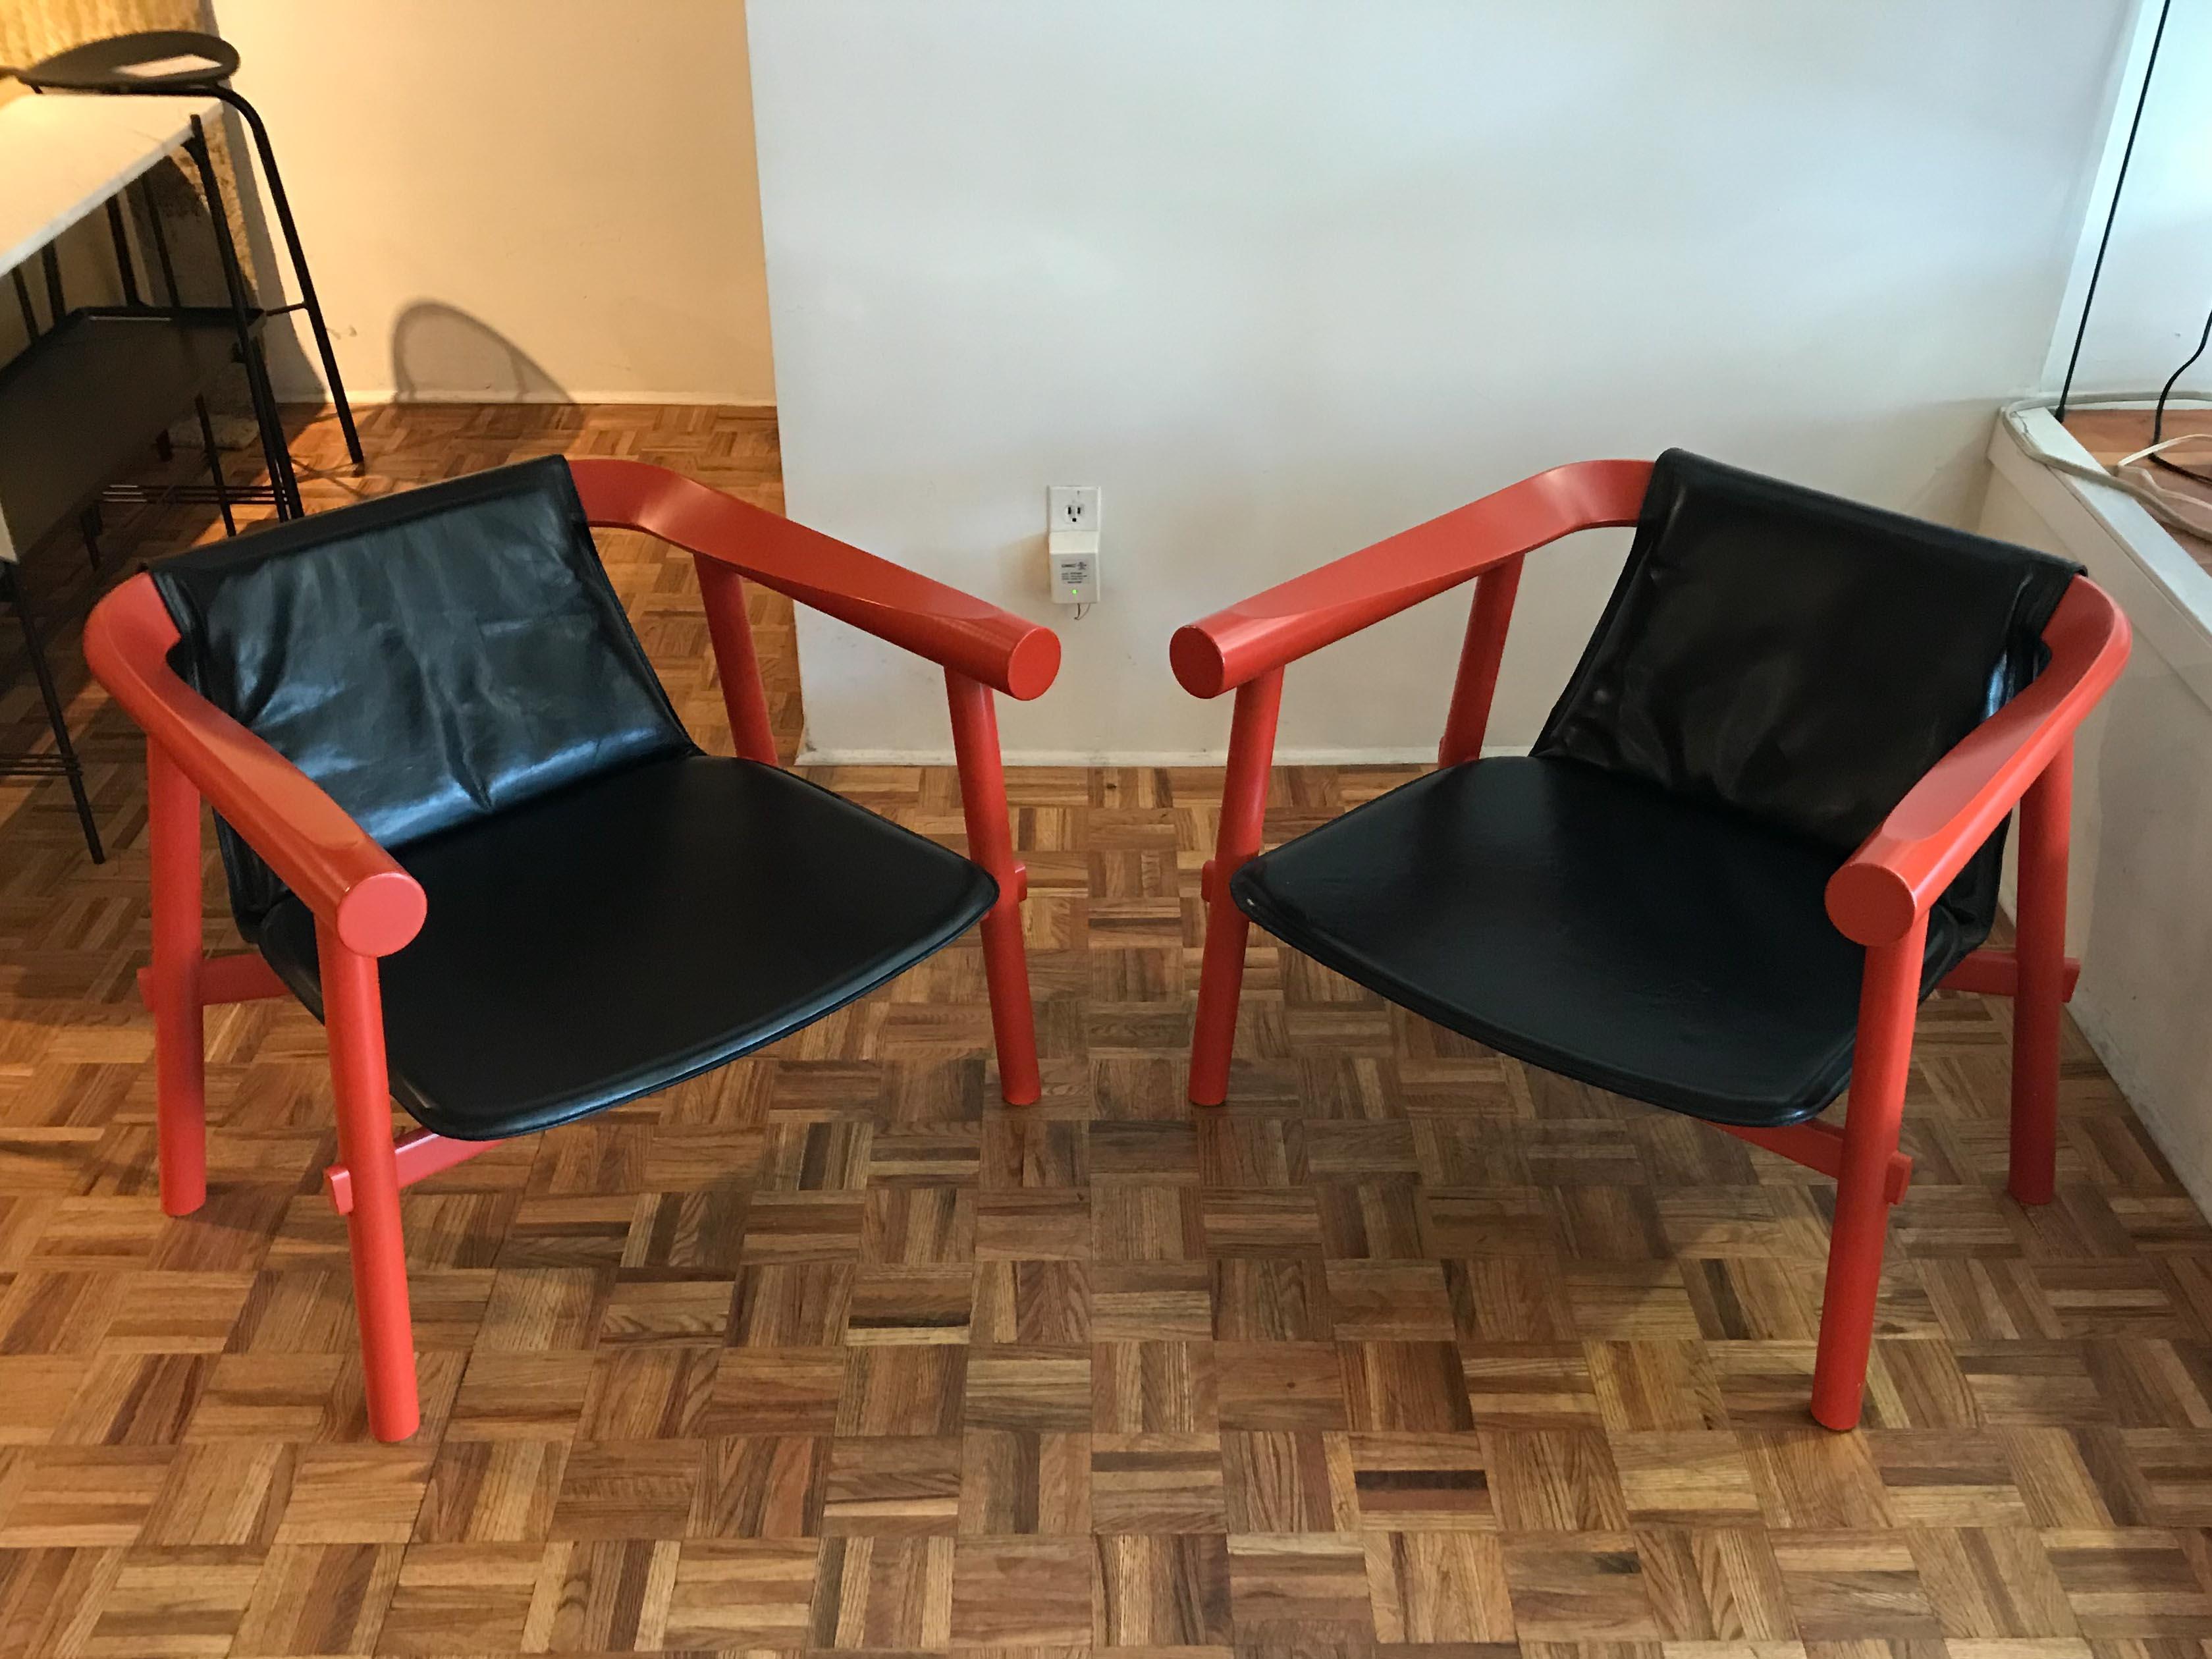 Pair of log chairs by Patricia Urquiola for Artelano, comprised of a solid beech frame in a lacquered orange finish with a seat made of black full-grain leather. Very good vintage condition, minor wear consistent with age and use, small chip in